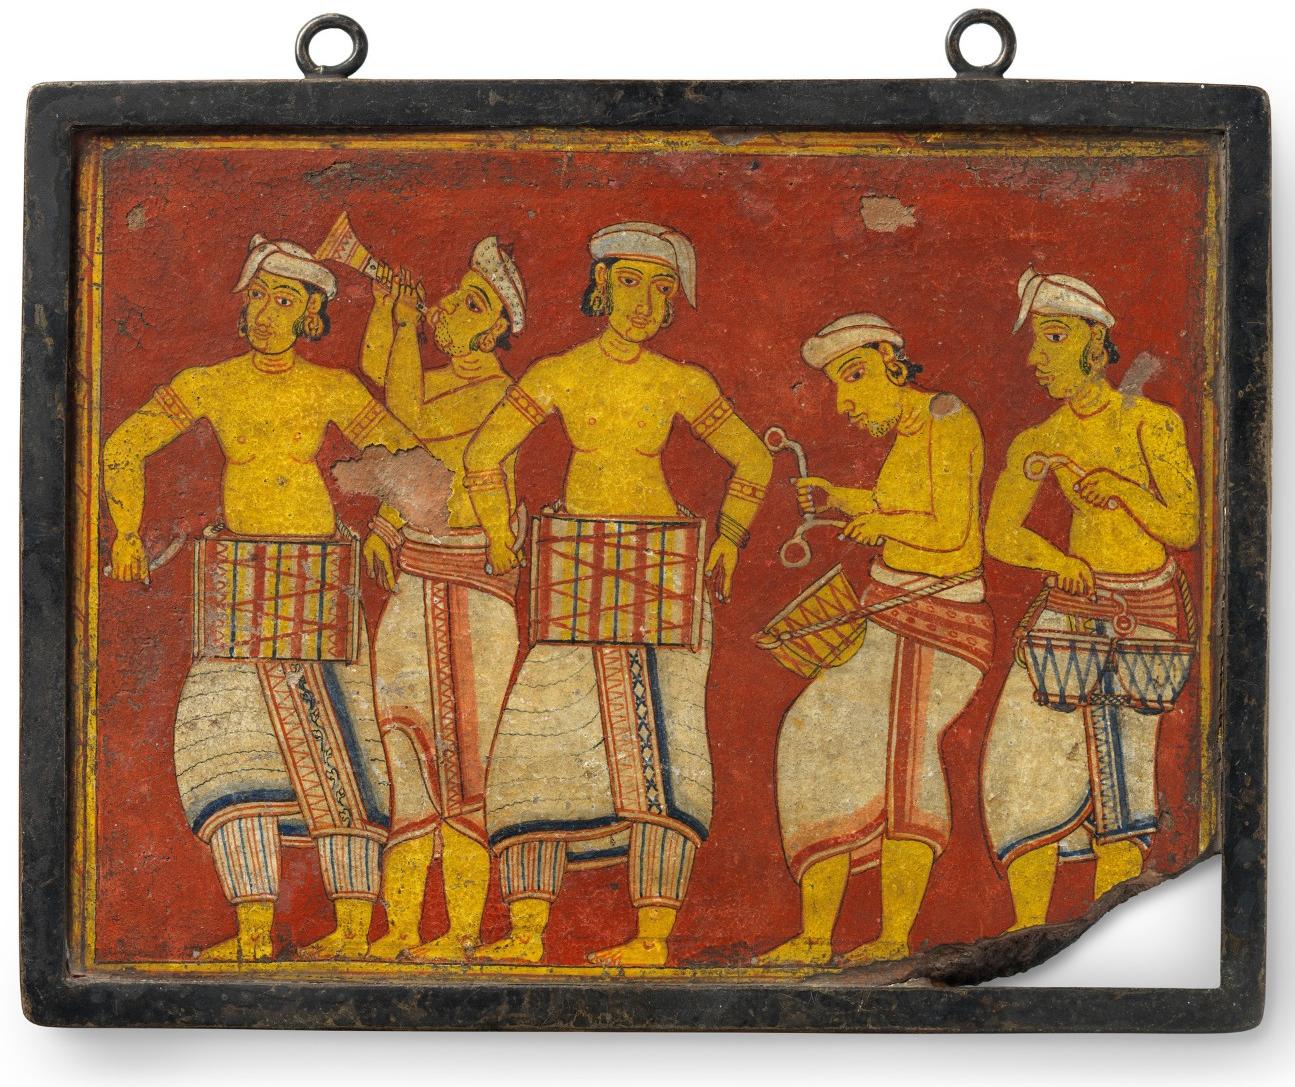 Tile with Musicians, late 18th century